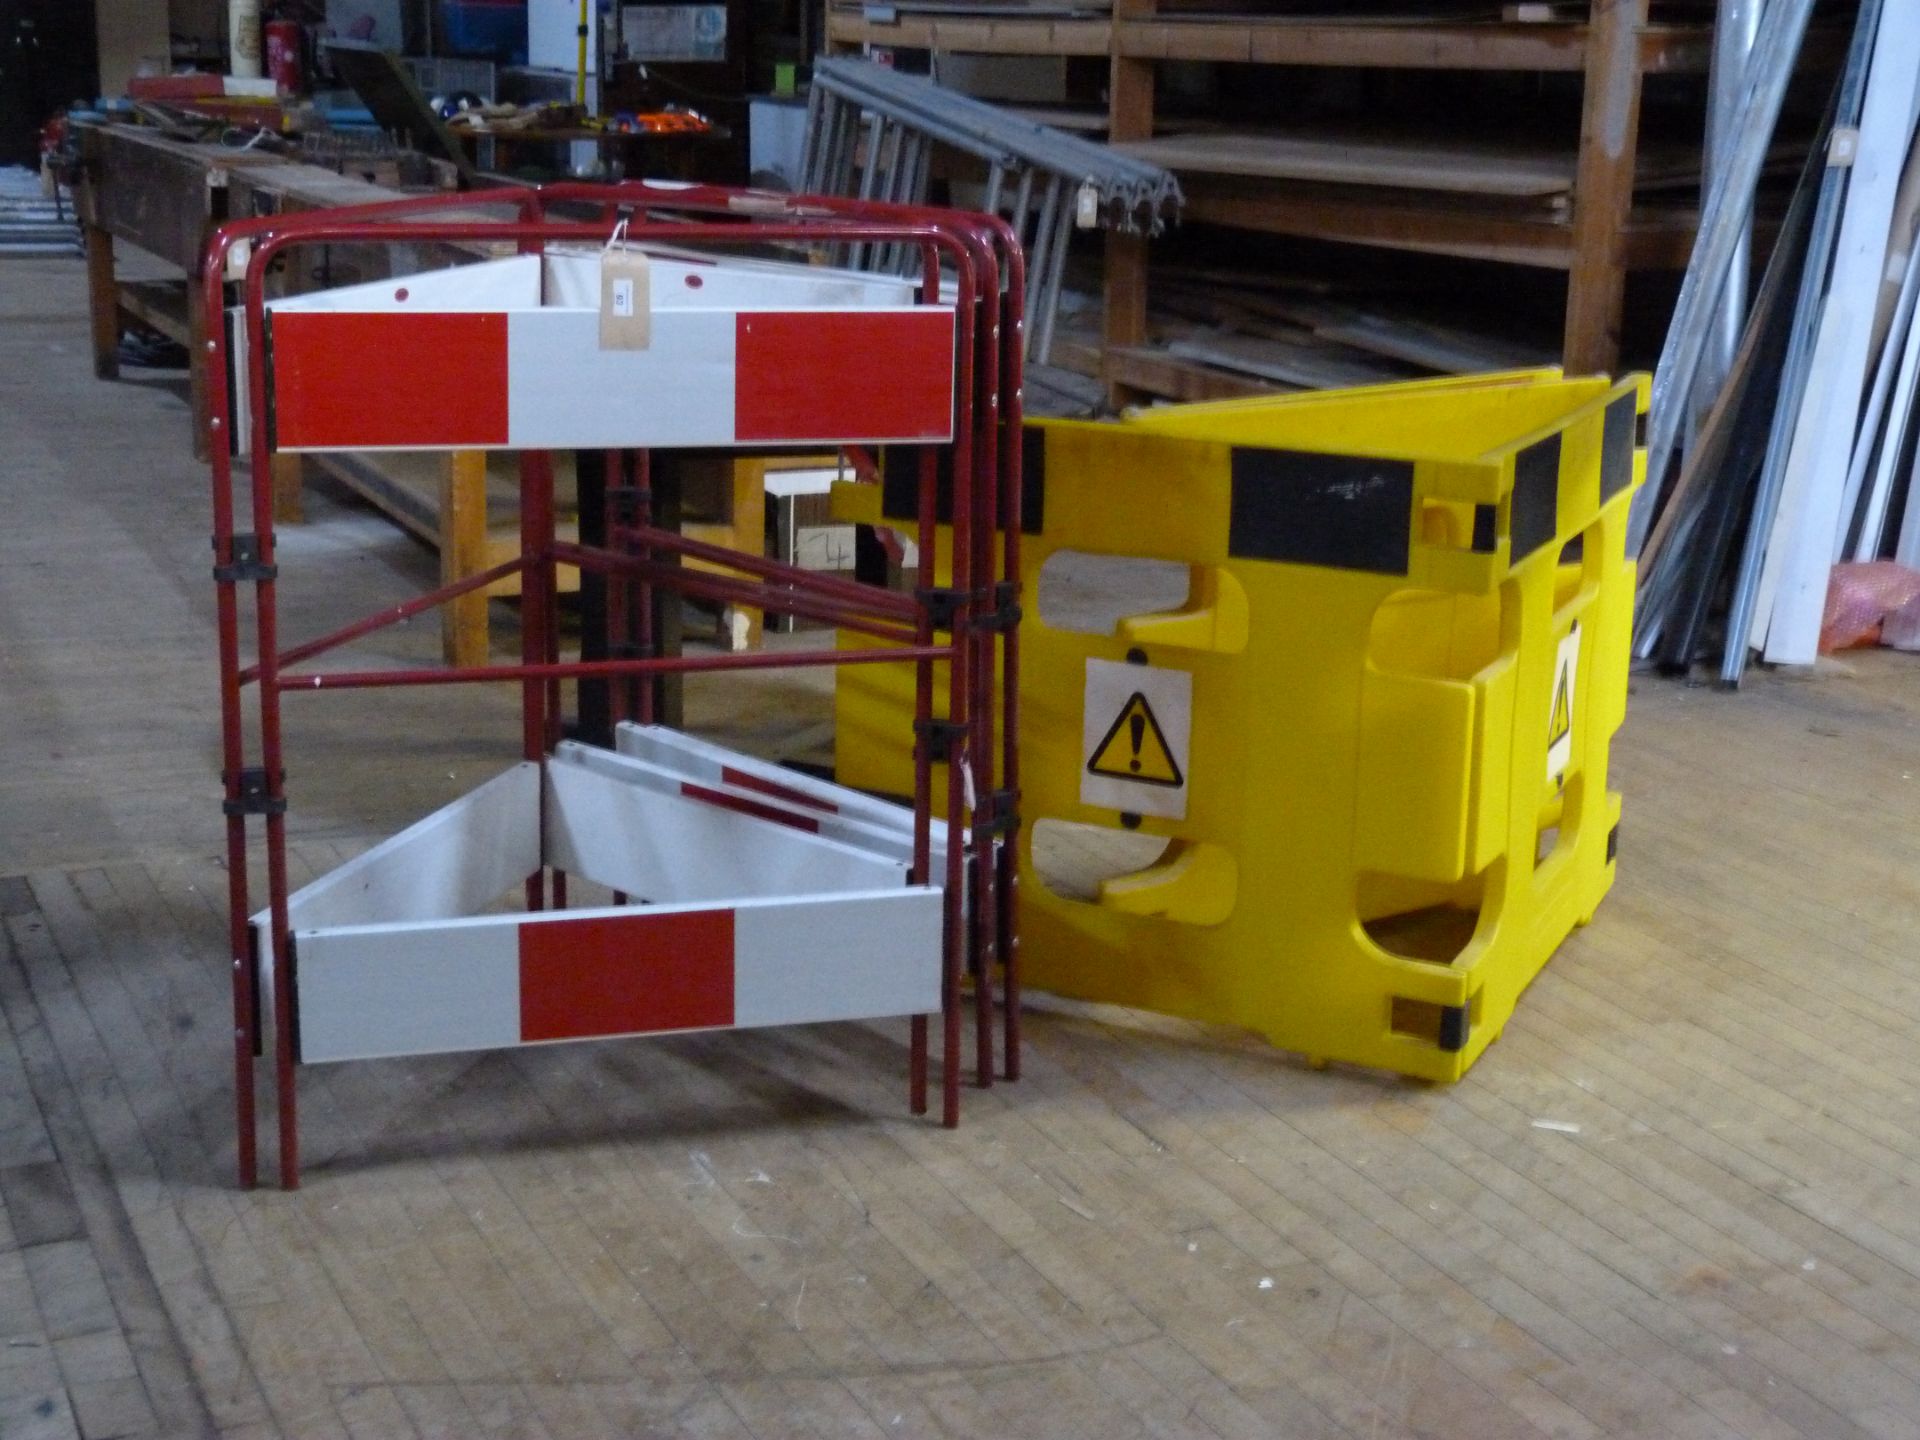 Three JSP folding safety barriers